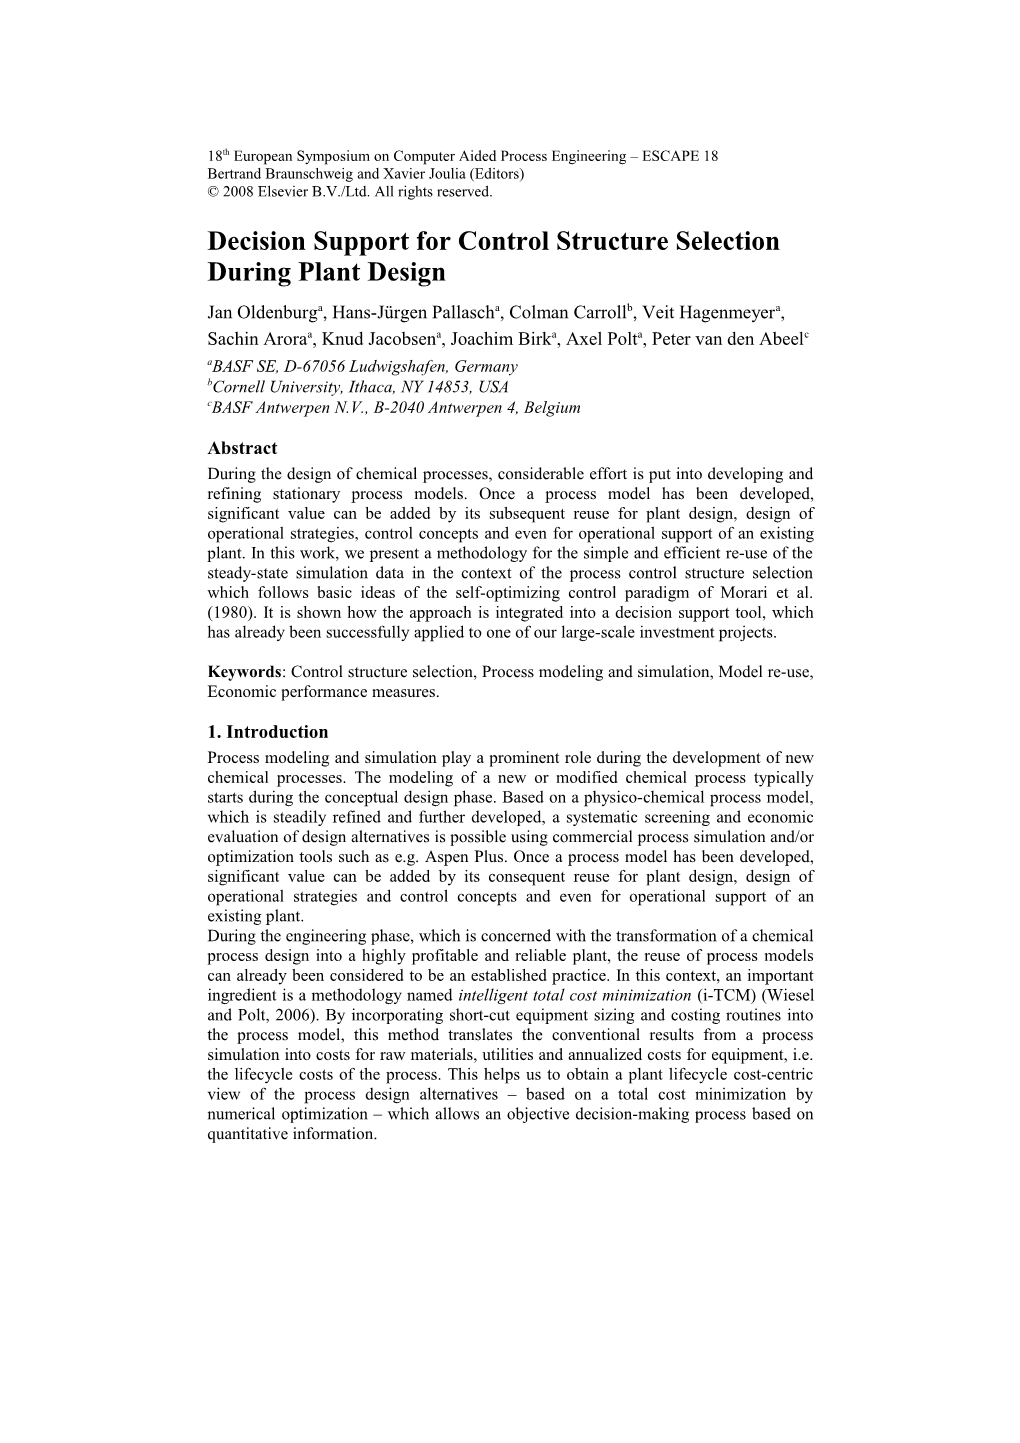 Decision Support for Control Structure Selection During Plant Design